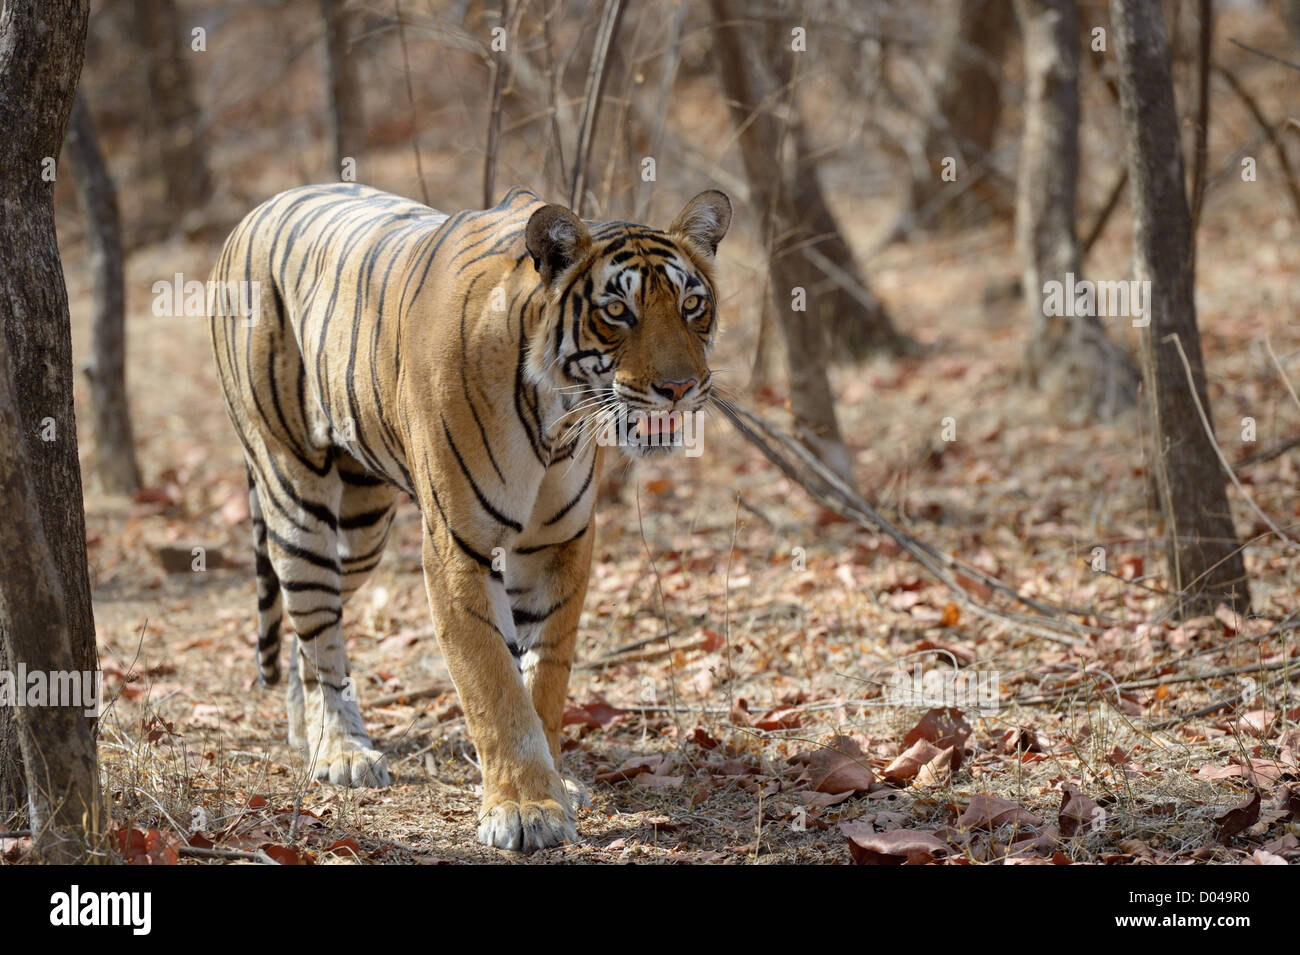 Bengal Tiger walking in dry forest. Stock Photo